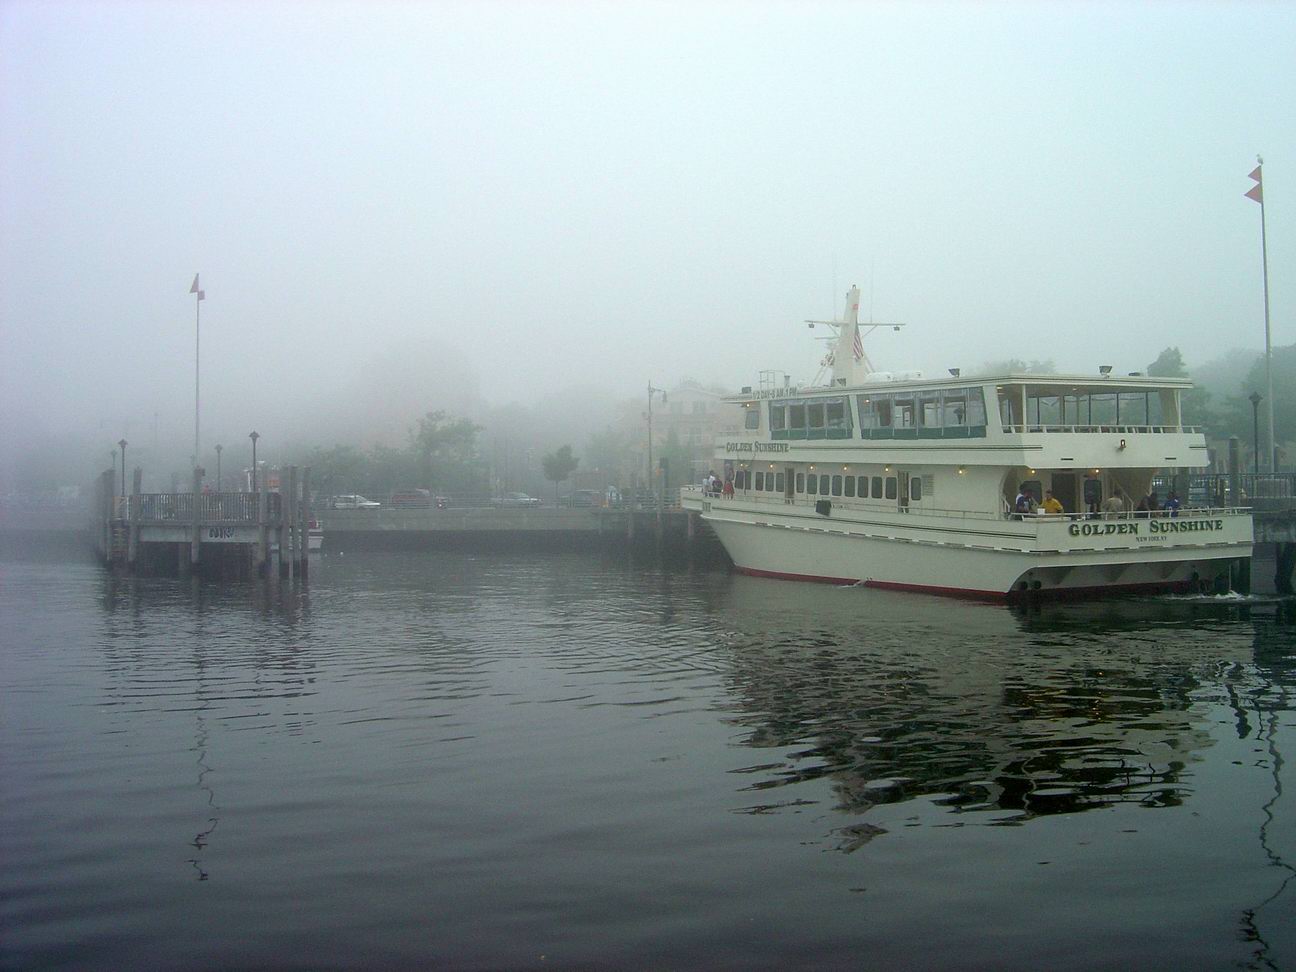 Foggy departure from the Sheepshead Bay port (June 2004)